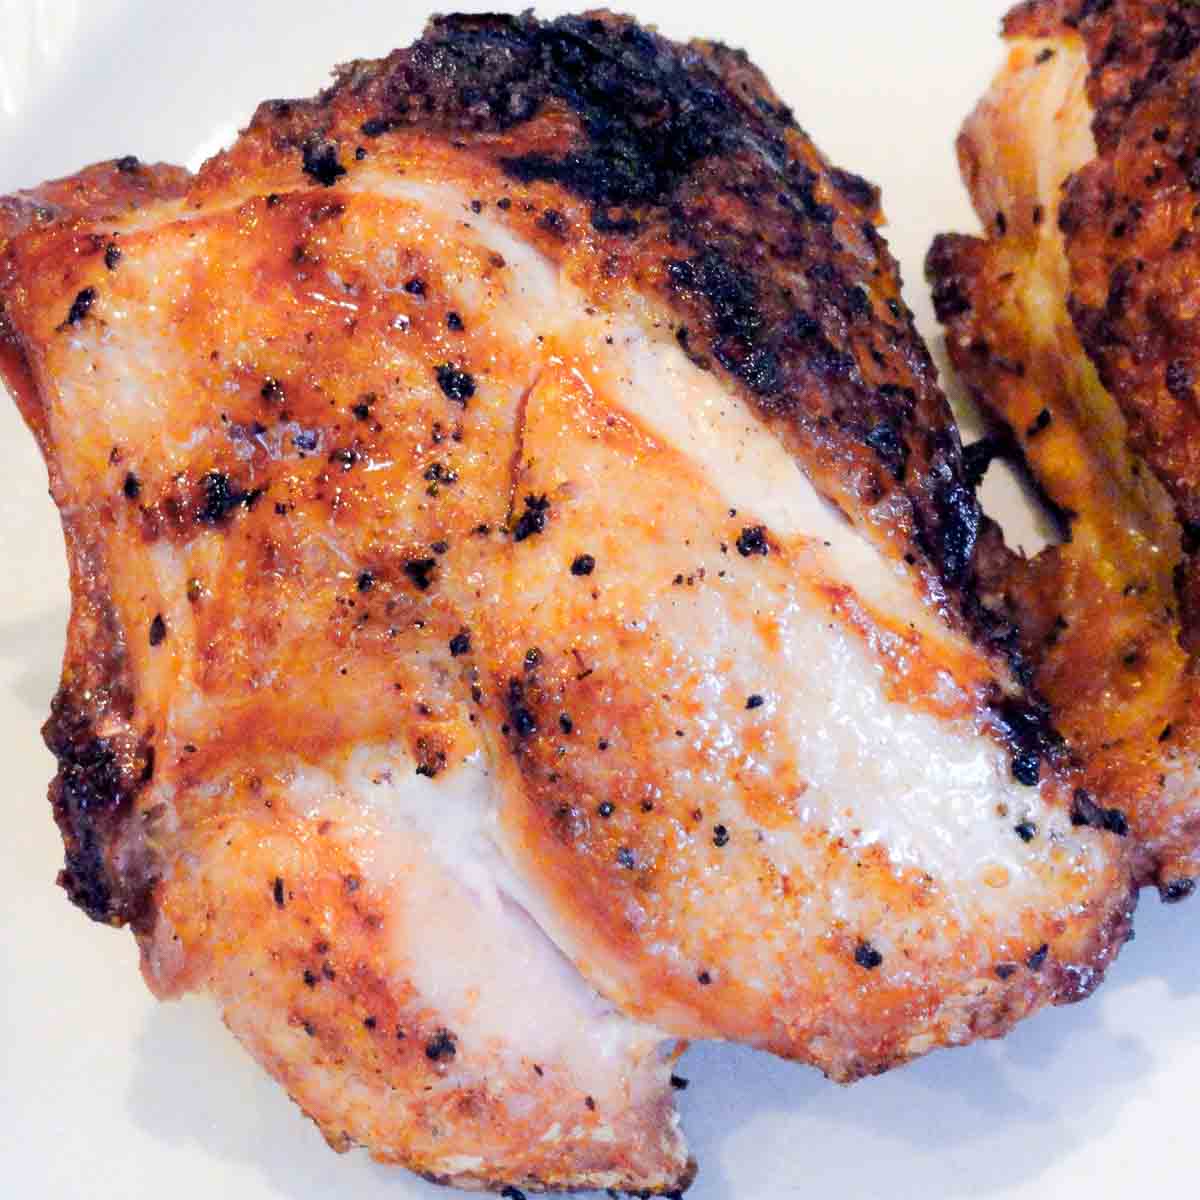 Crispy Grilled Split Chicken Breasts 101 Cooking For Two,Milk Shake Recipe